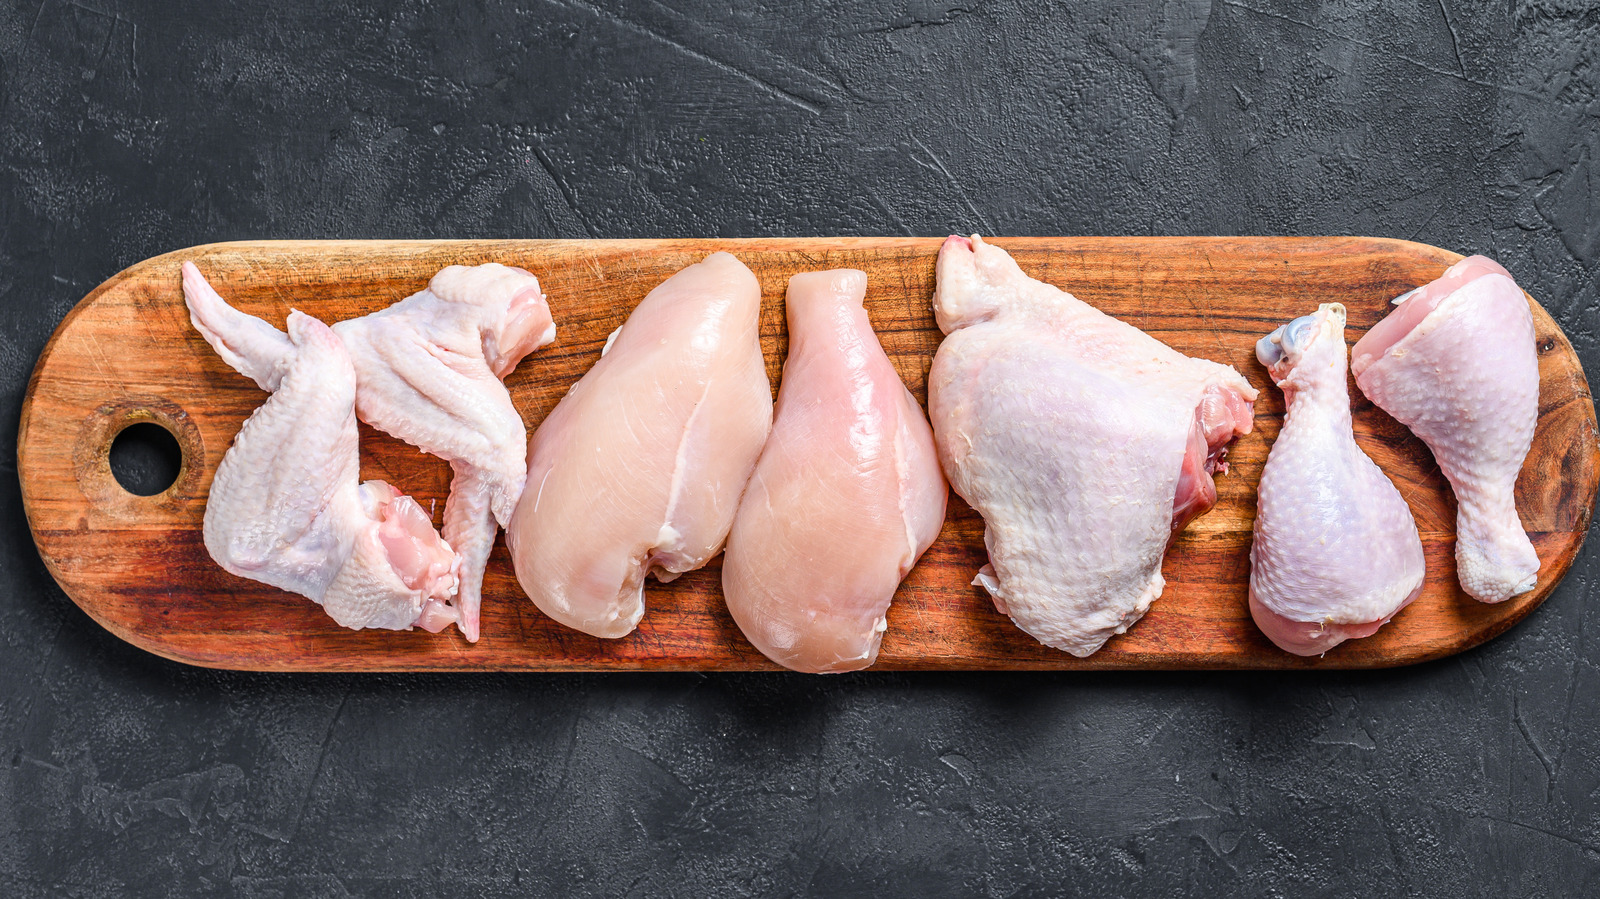 13 Chicken Cooking Hacks You'll Wish You Knew Sooner